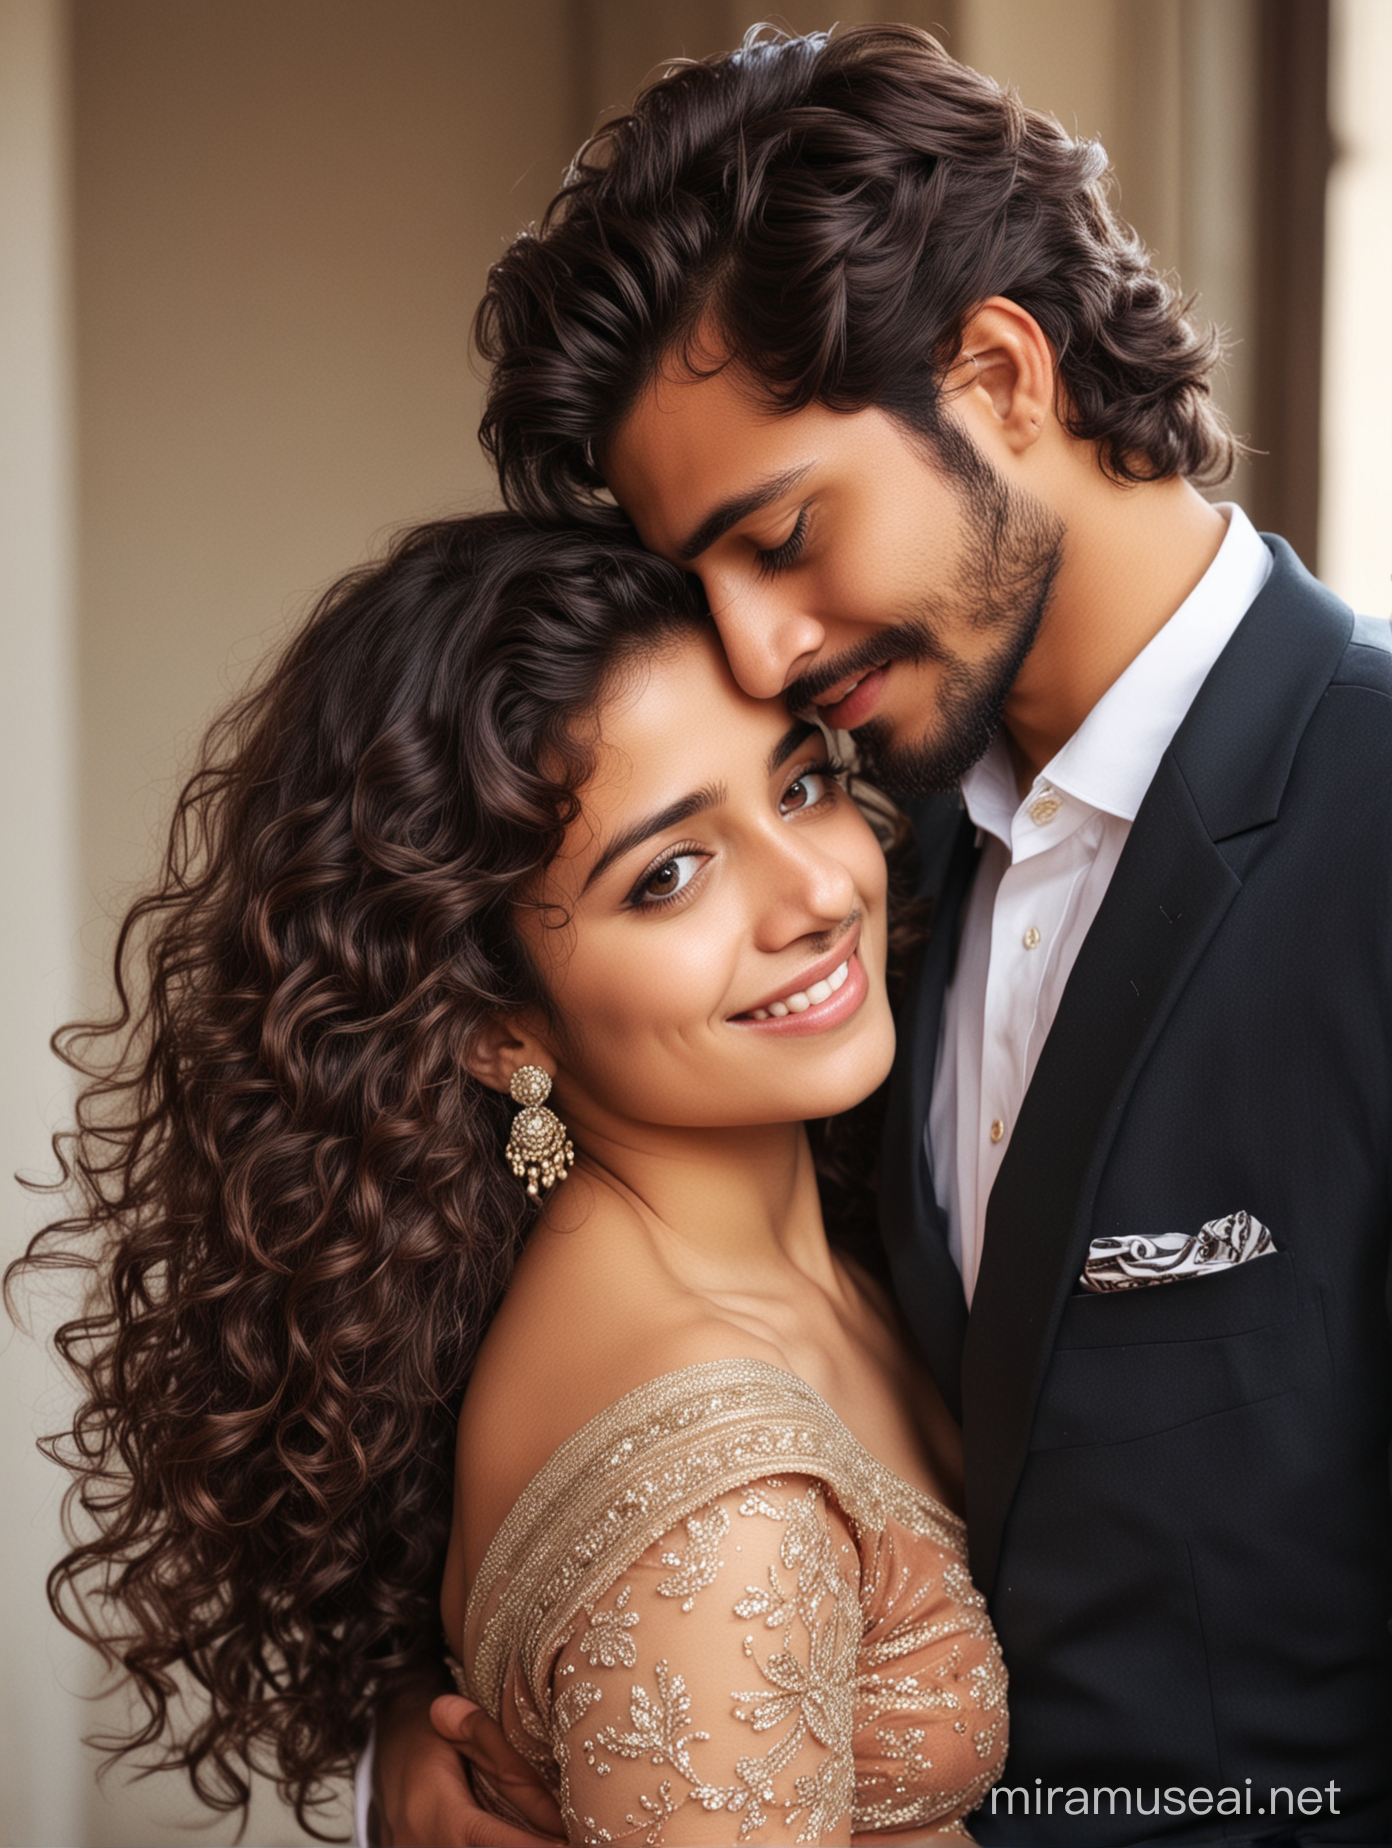 two intimate lovers, indian handsome boy with european features, , 22 years old, european features, formal suit, light trim beard, alfa male, girl, 18 years old, most beautiful indian girl, elegant saree look, low cut back, long curly hair, touching head to boy shoulder, shy and modest smile, boy comforting girl with one hand on back of girl, photo realistic, 4k.
